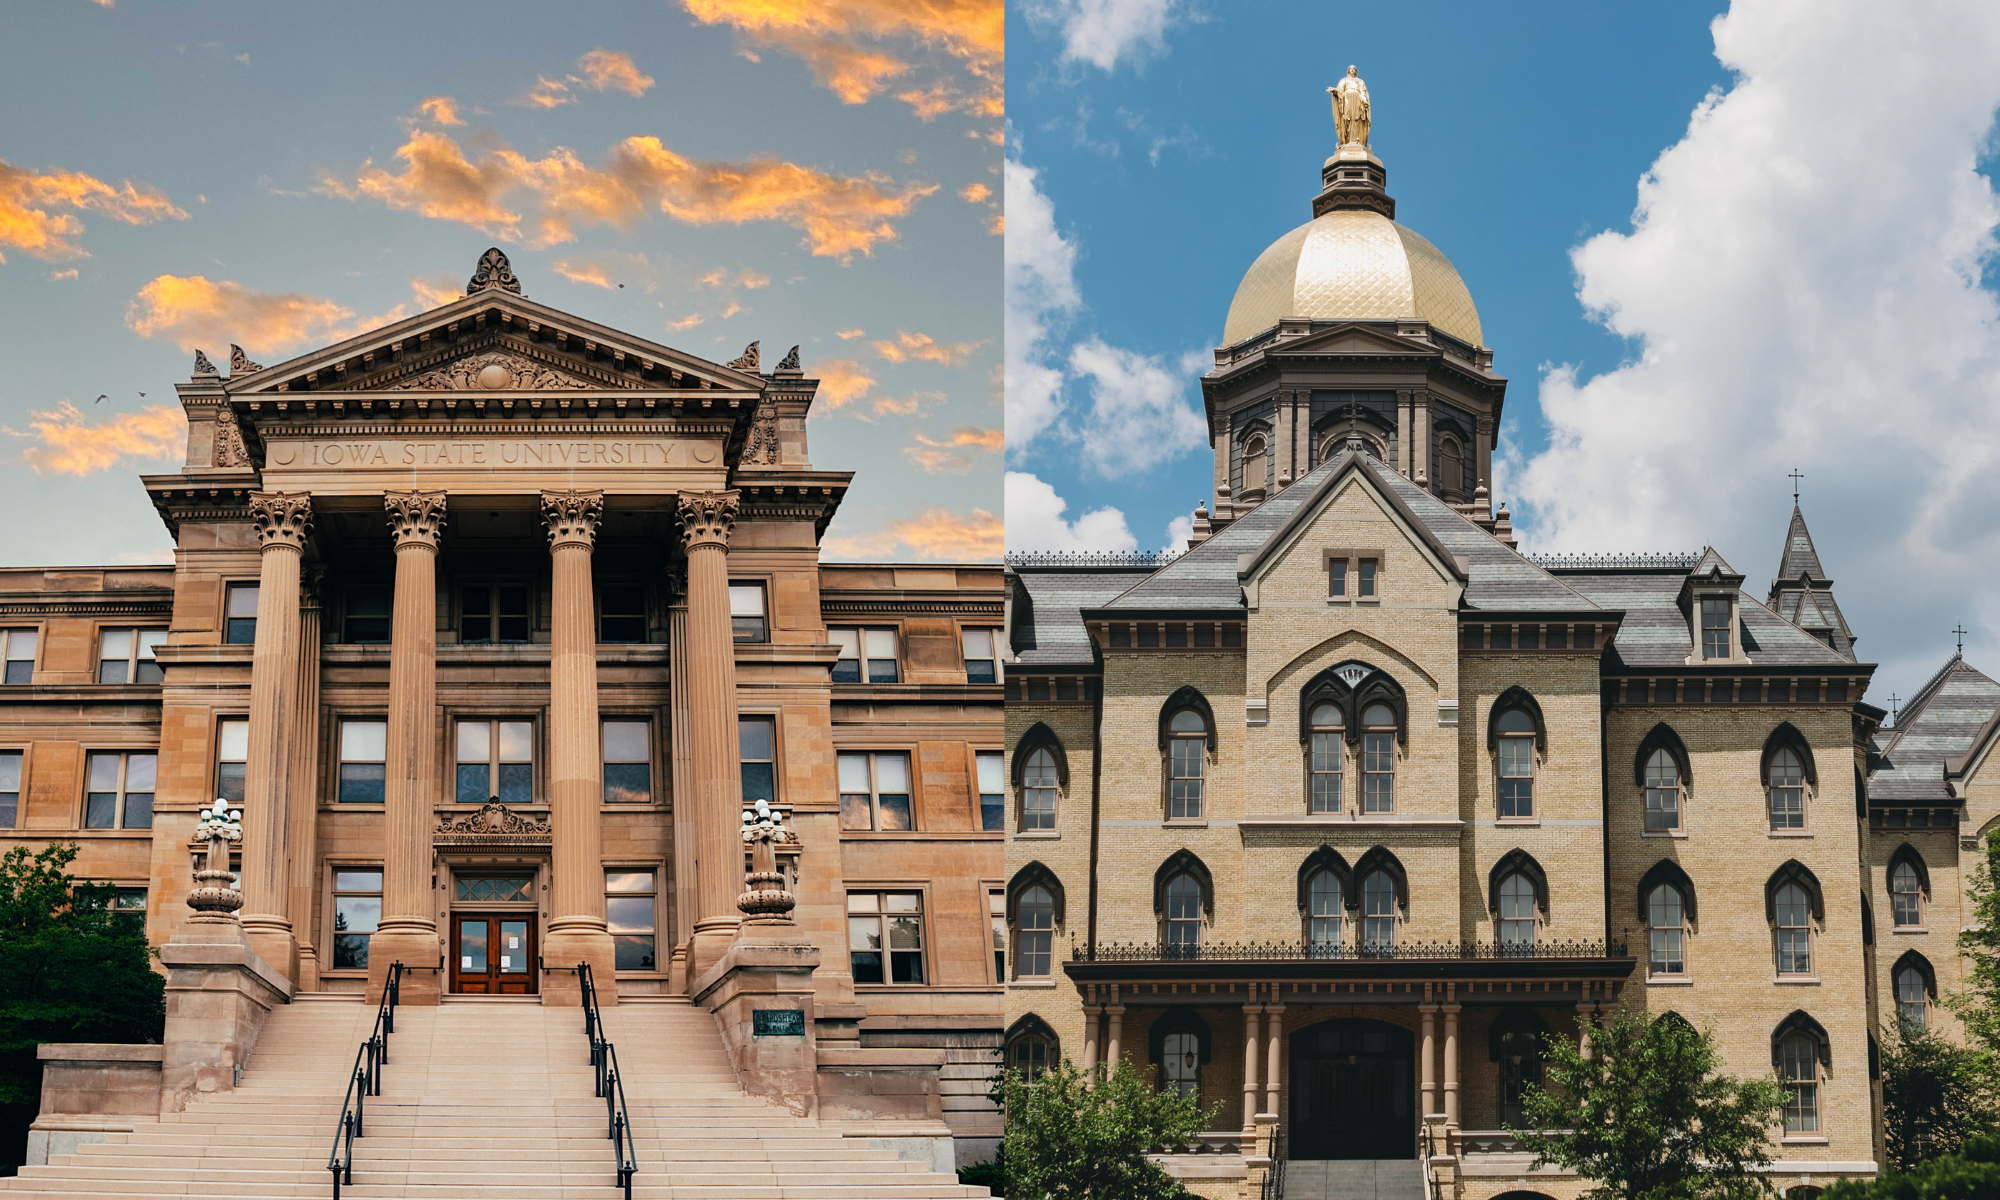 A composite image of buildings on the campus of Iowa State University and Notre Dame University